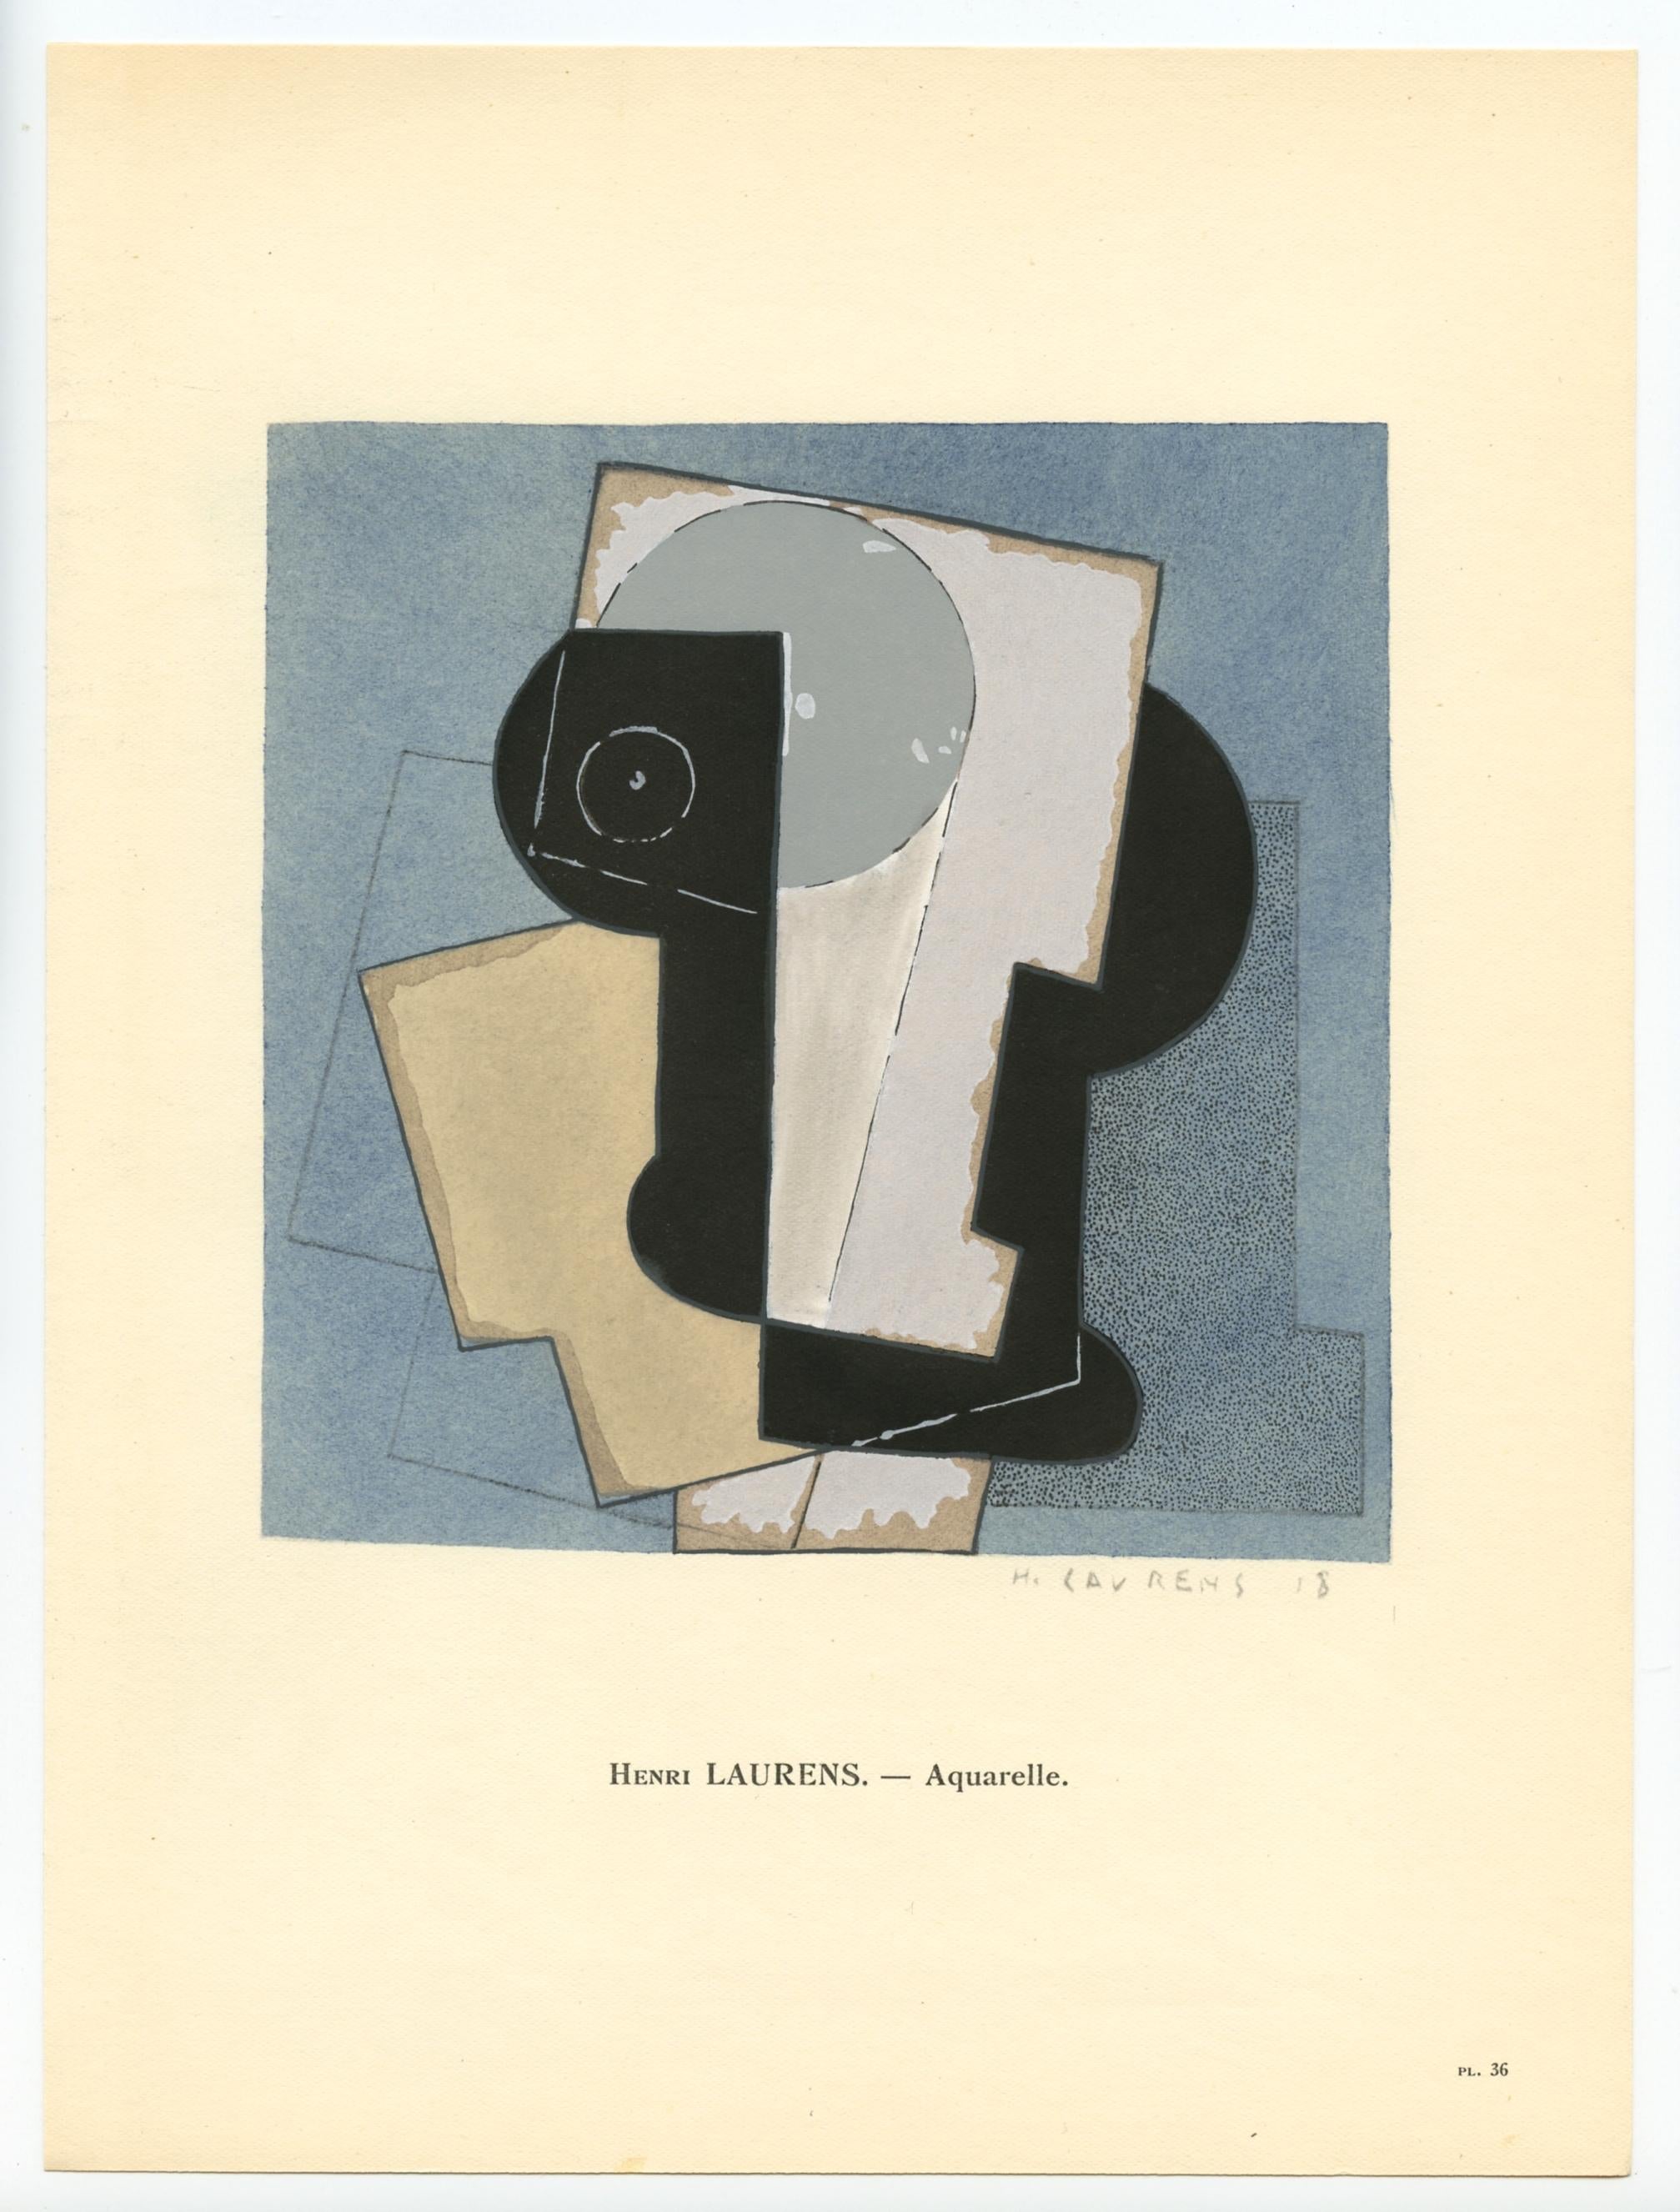 Medium: pochoir (after the gouache). Printed in Paris in 1929 at the atelier of Daniel Jacomet for L'Art Cubiste. Image size: 5 1/4 x 8 1/8 inches (132 x 205 mm). A text inscription beneath the image identifies the artist. Signed in the plate (not